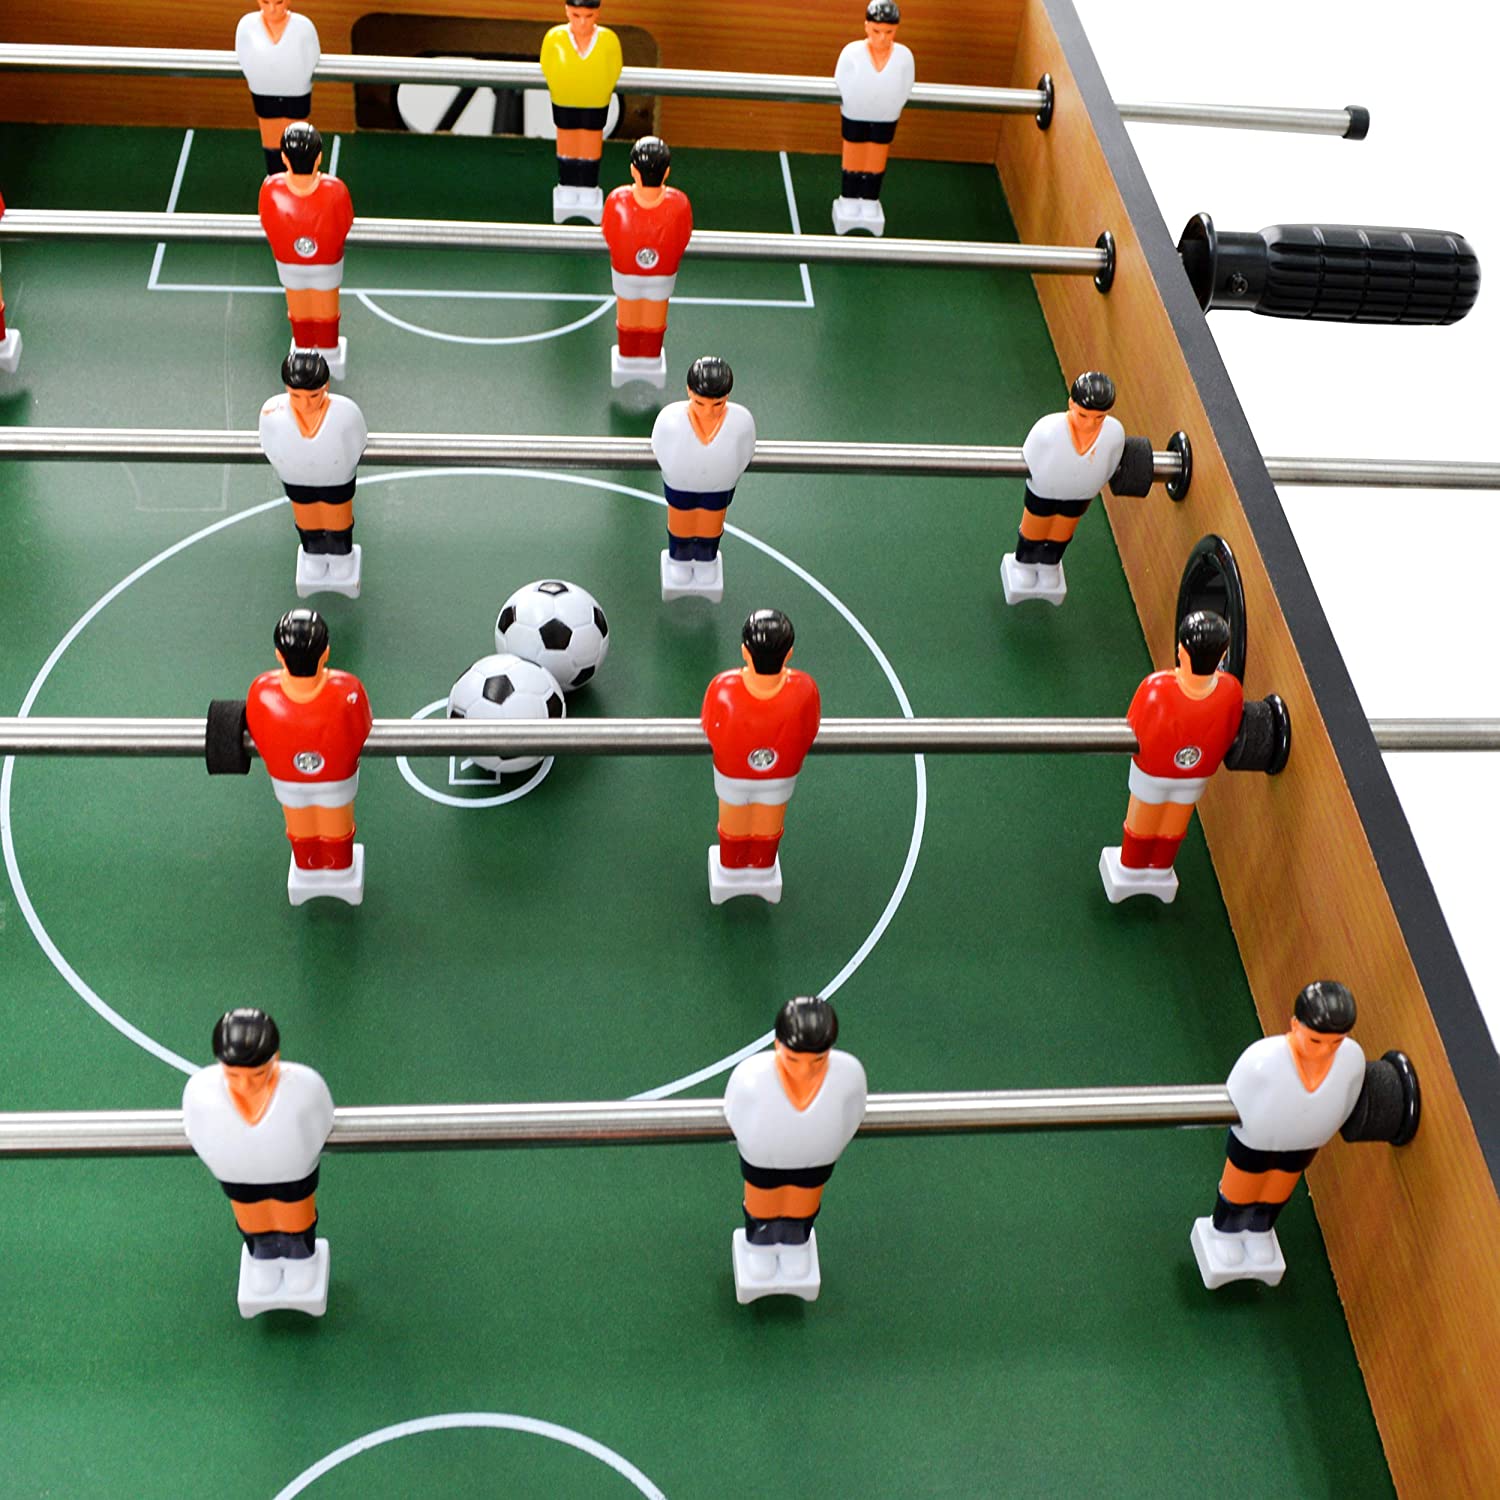 Jimmy's Toys 27'’ Foosball Table for Kids - Full Size Game Room Table for Children - image 5 of 5